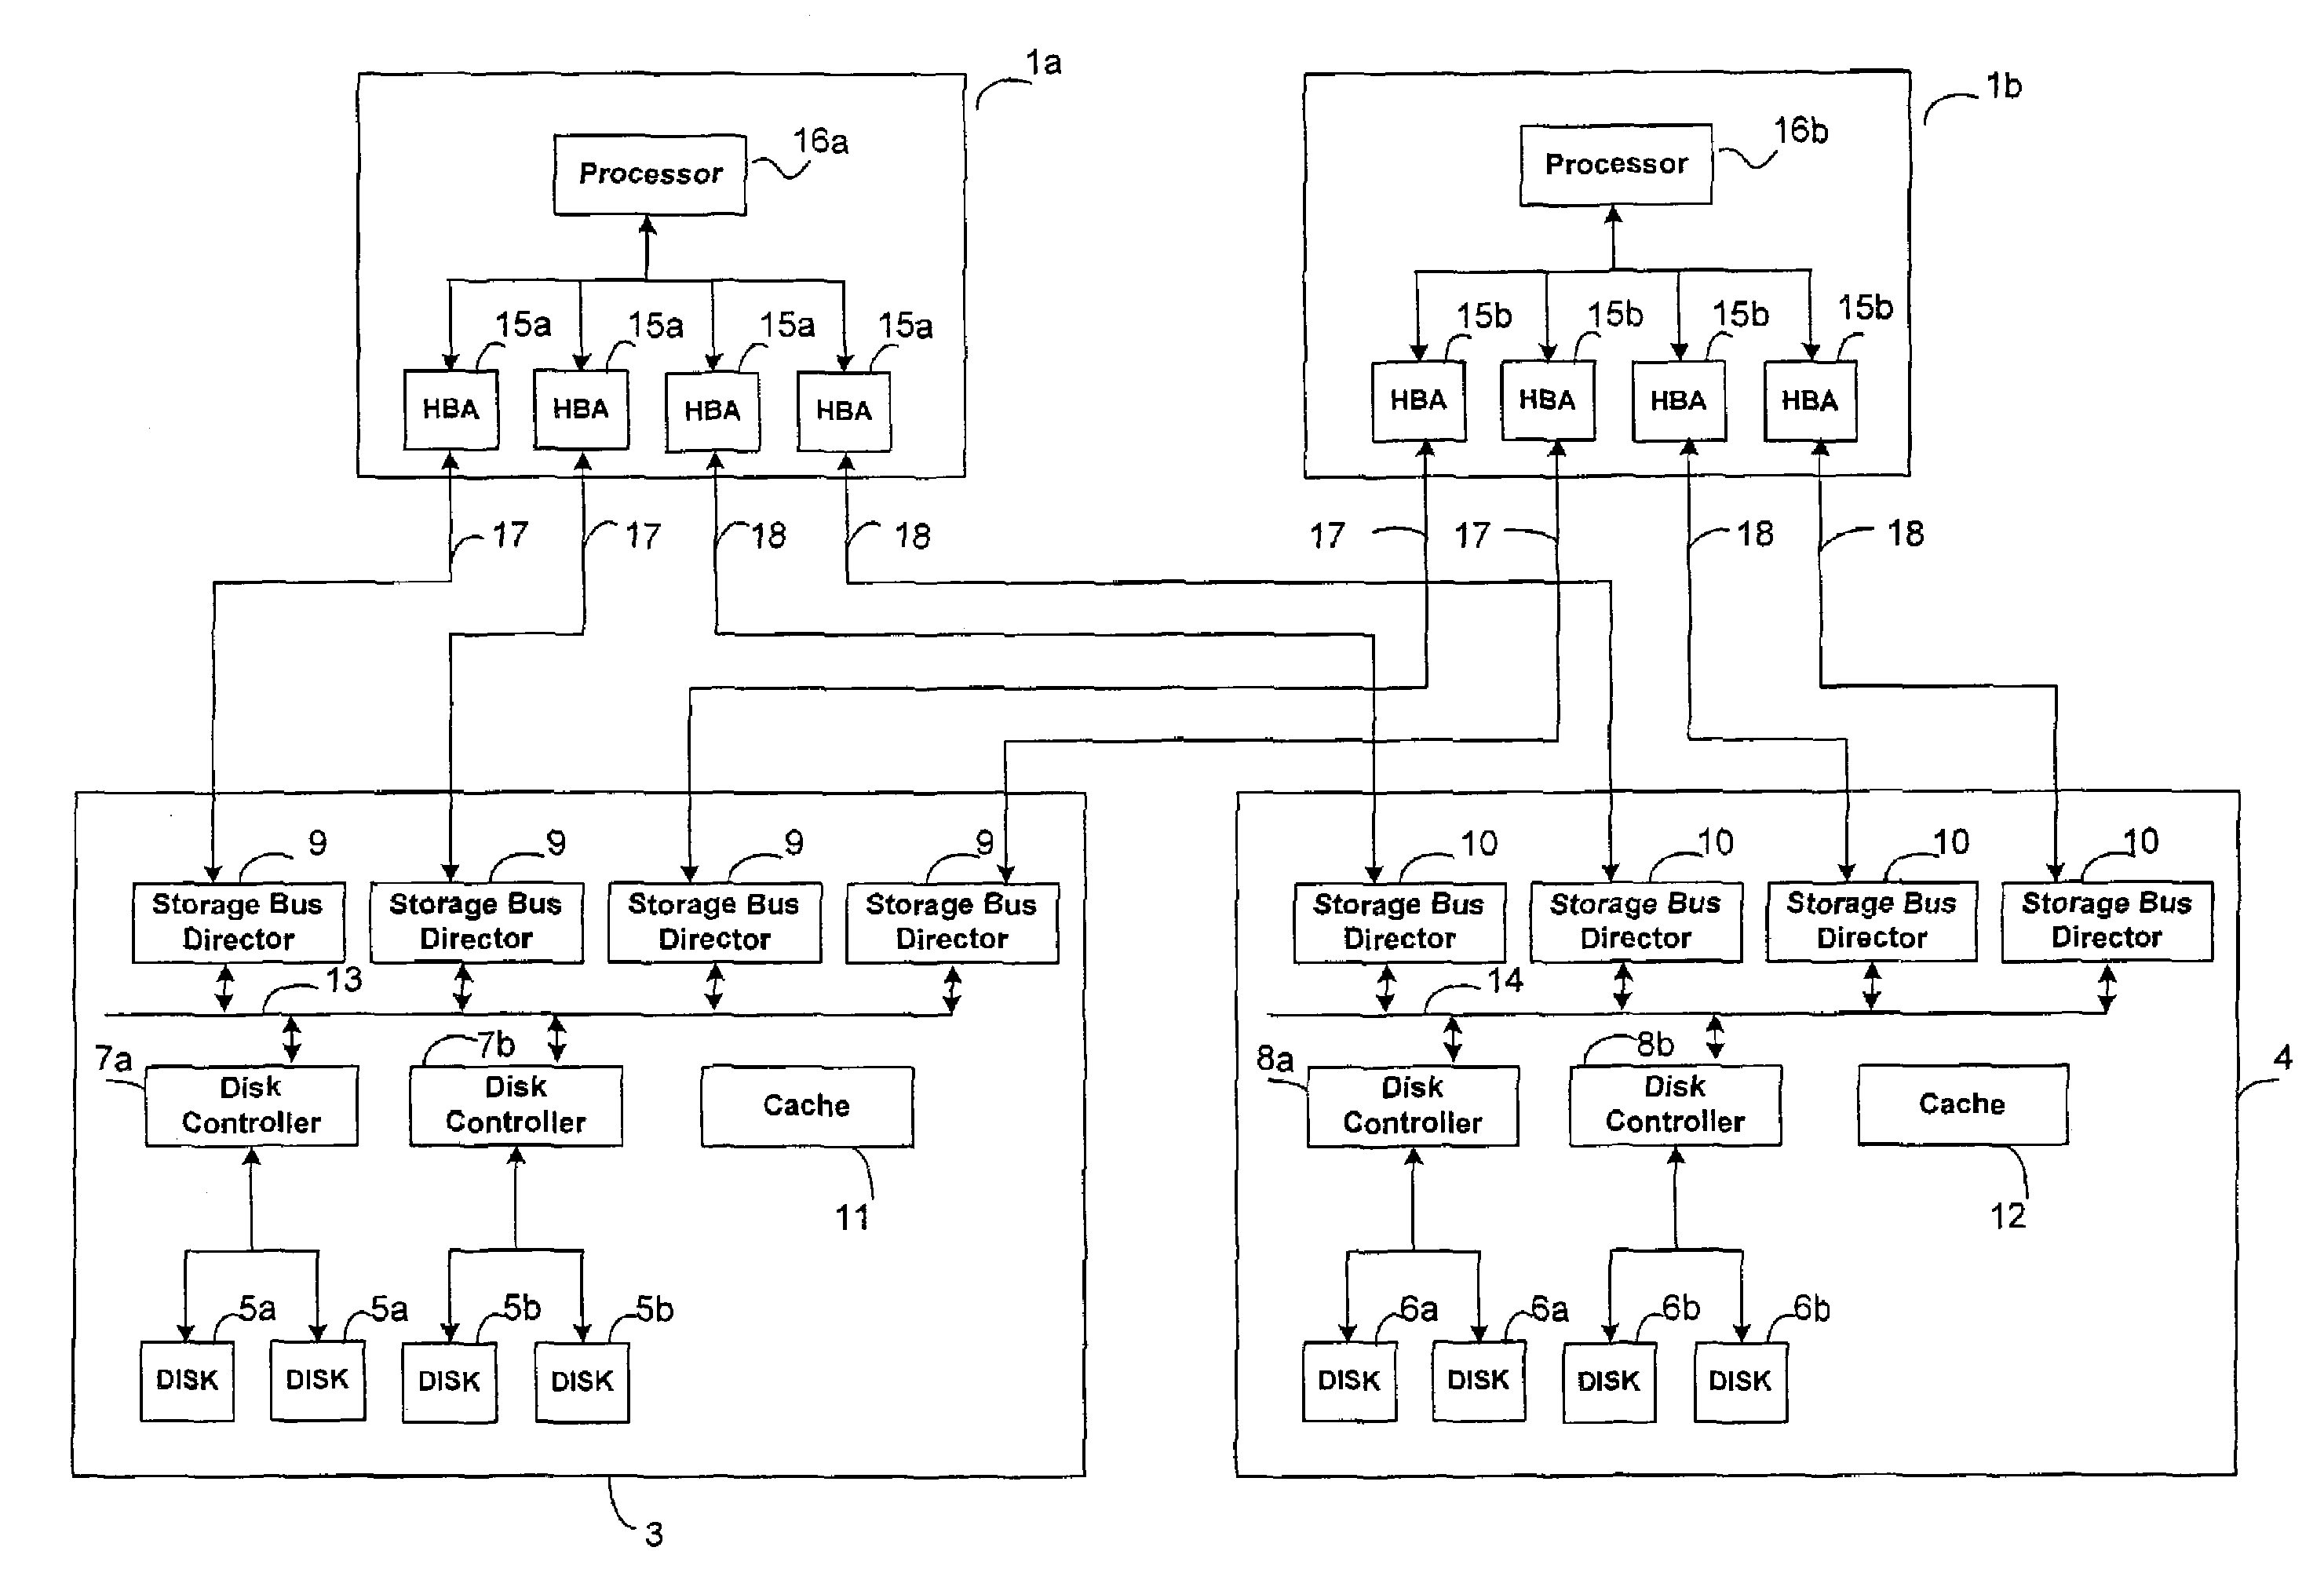 Method and apparatus for managing migration of data in a clustered computer system environment